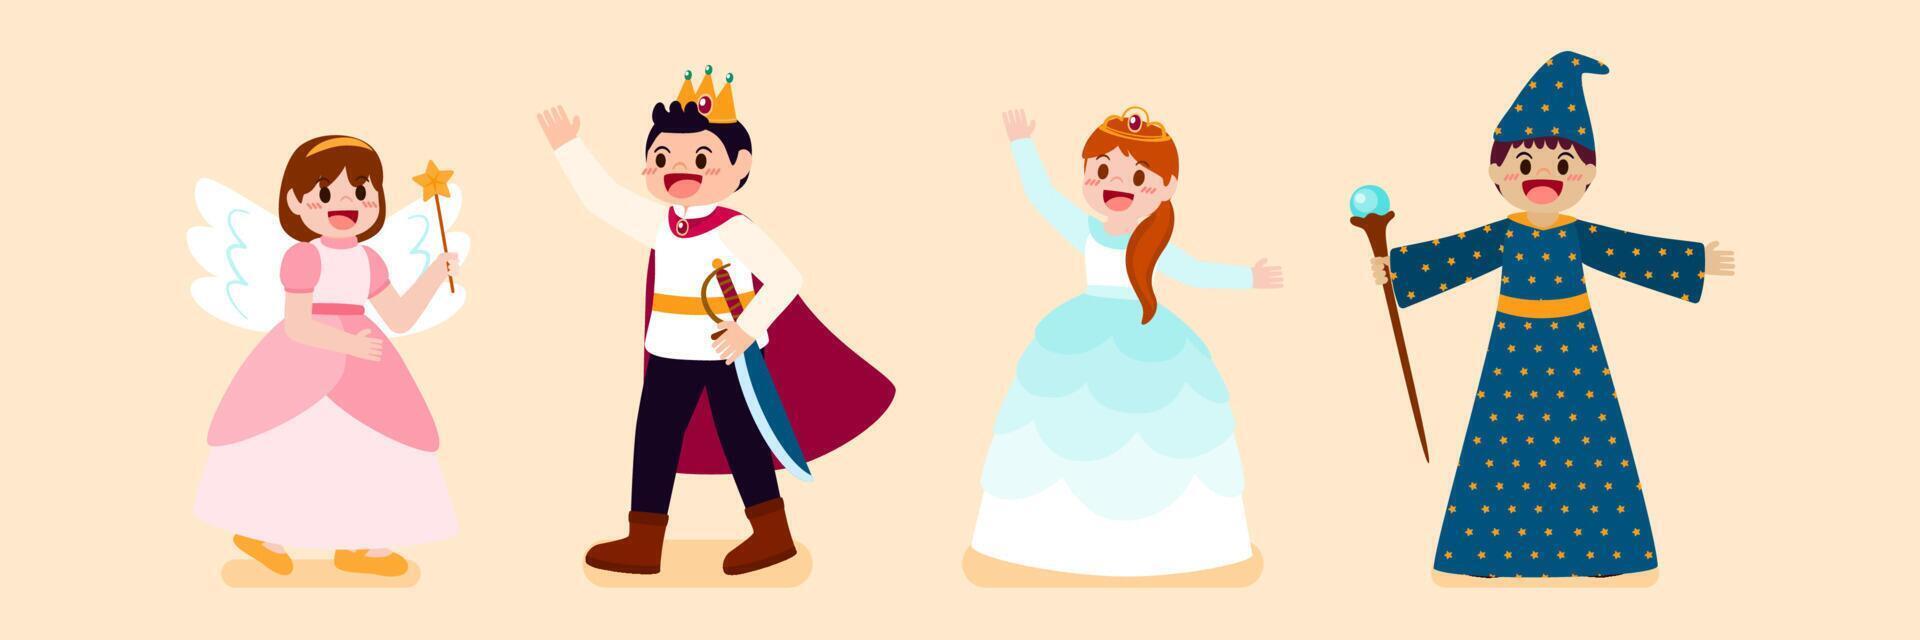 The children happy in party with lovely fairy tale theme vector